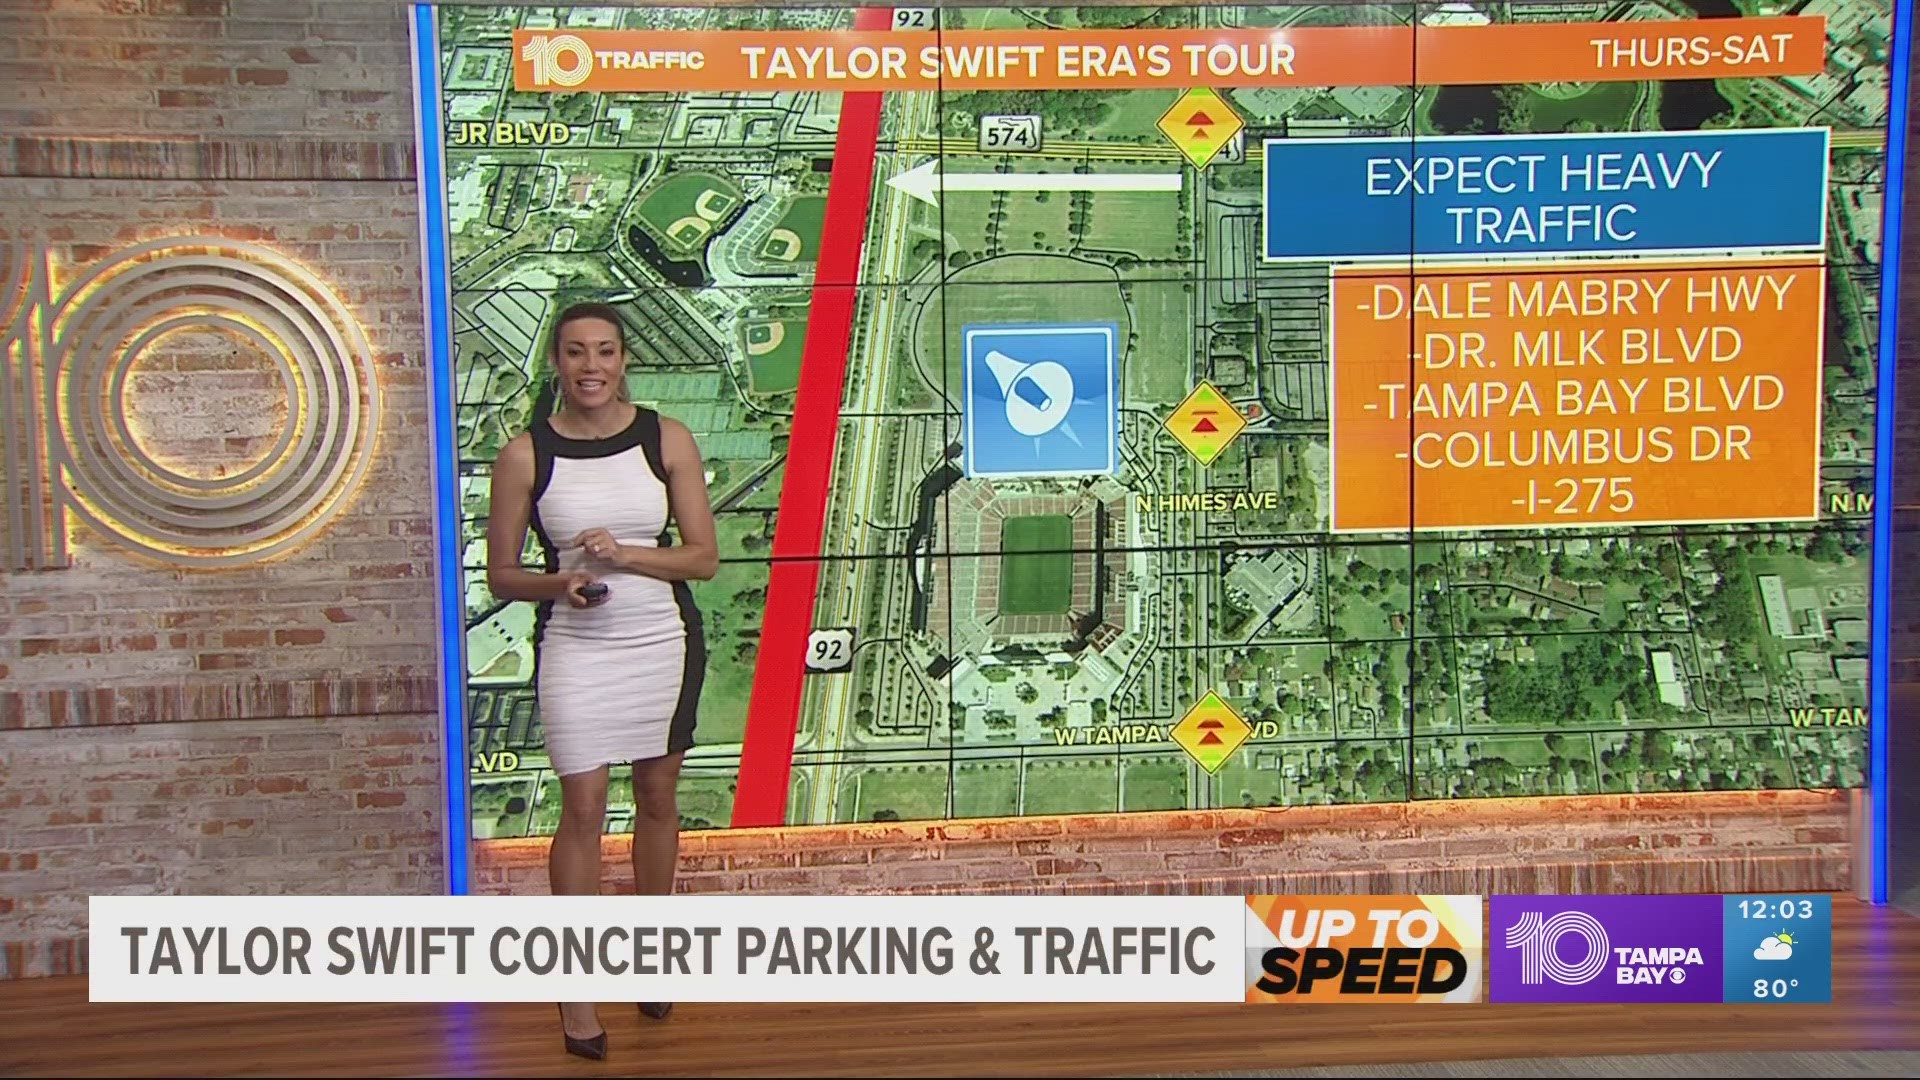 Traffic, parking for Taylor Swift in Tampa What you need to know